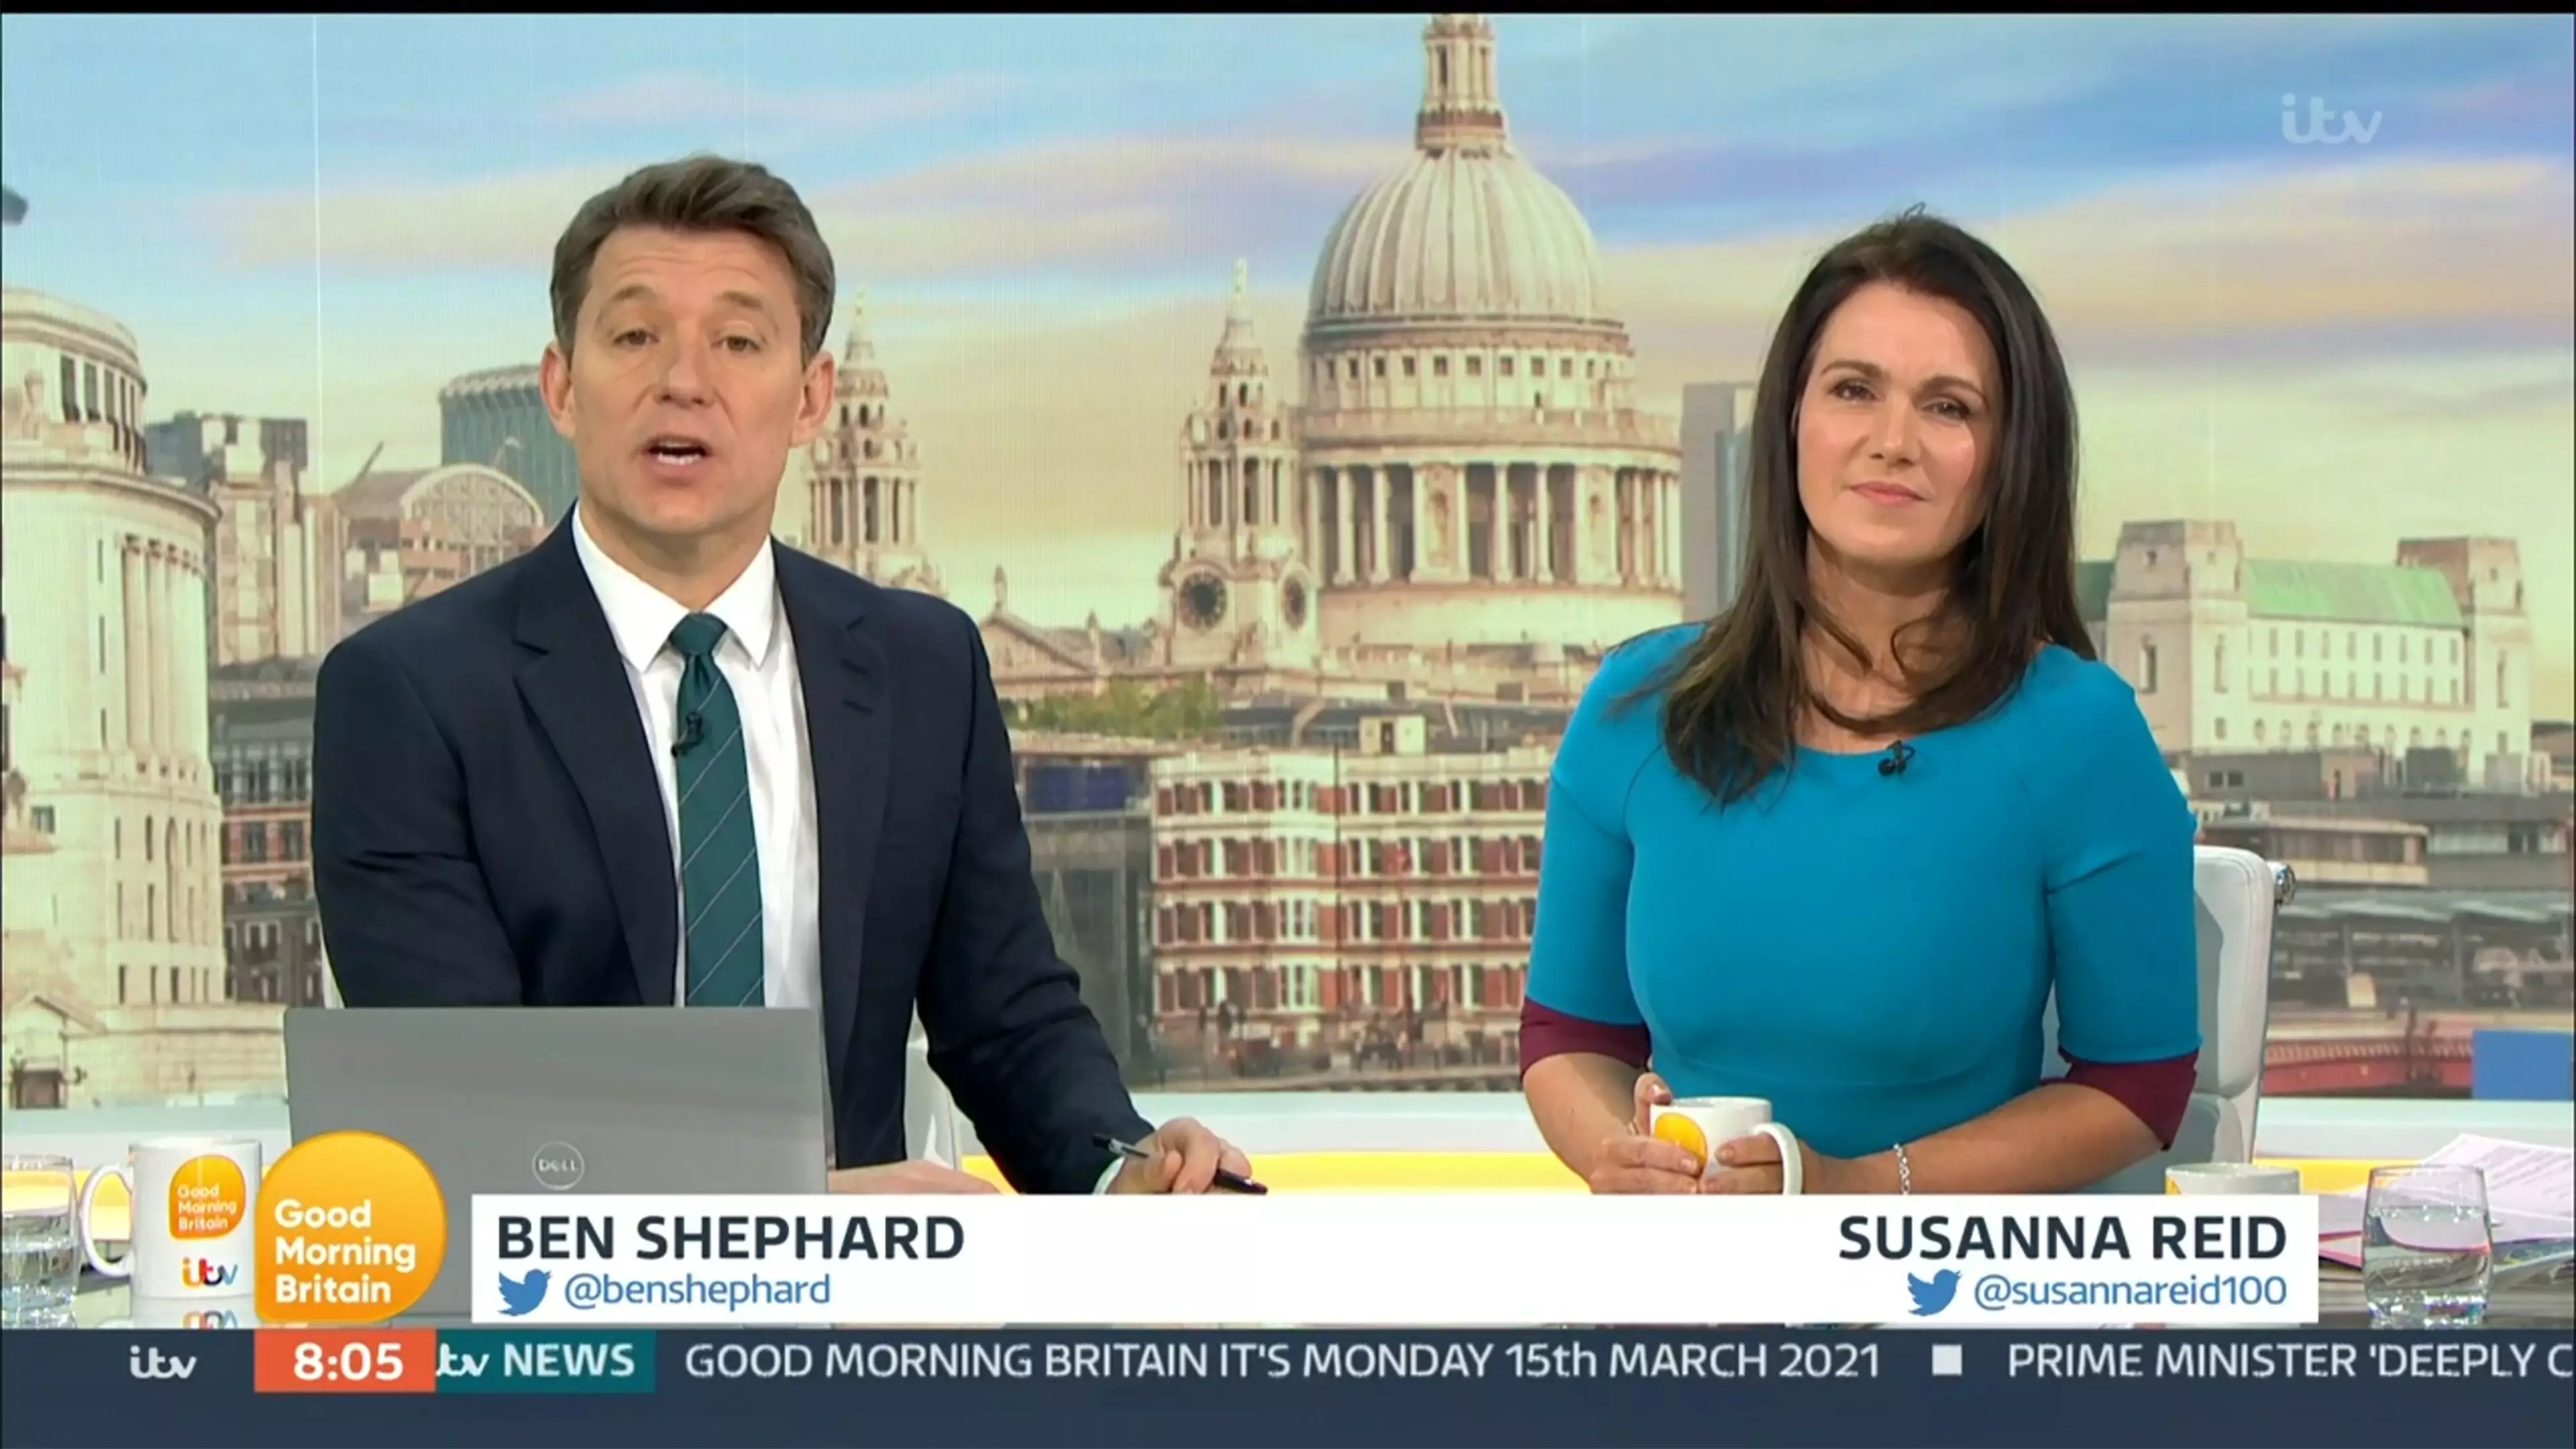 Susanna Reid discussed the images on Good Morning Britain (